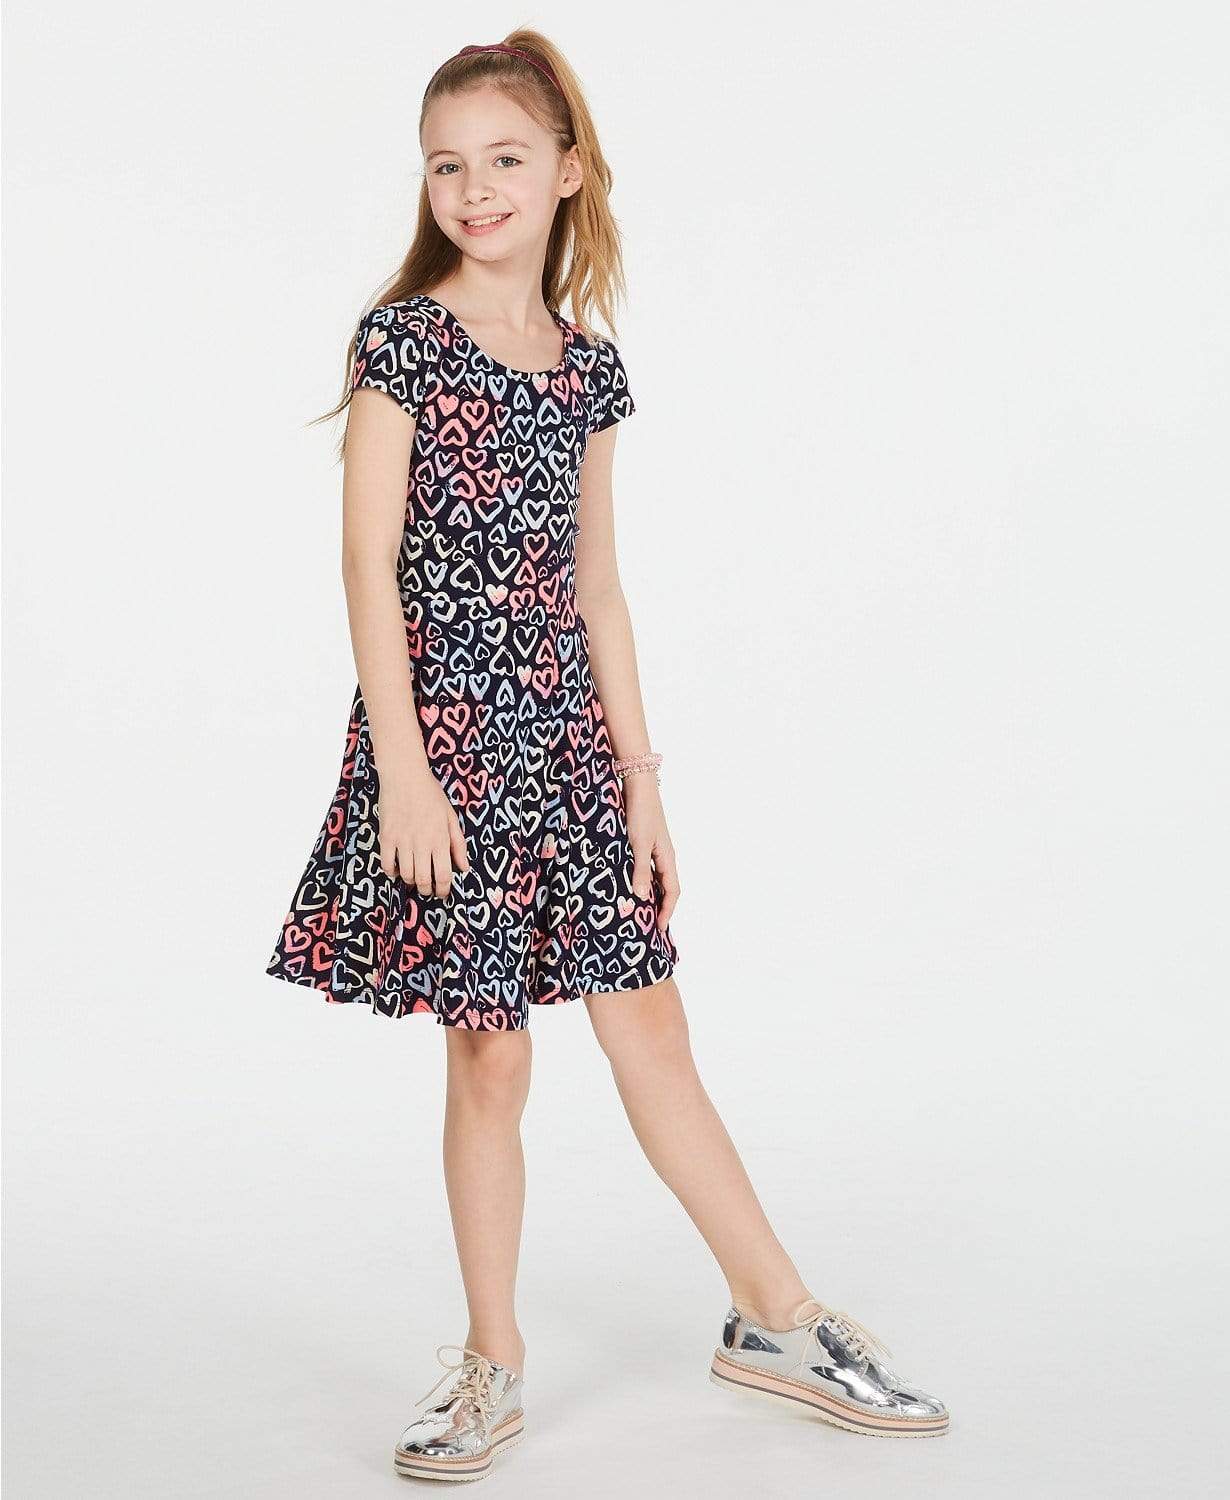 EPIC THREADS Girls Dress S / 6Years / Multi-Color EPIC THREADS -  Heart-Print Fit & Flare Dress